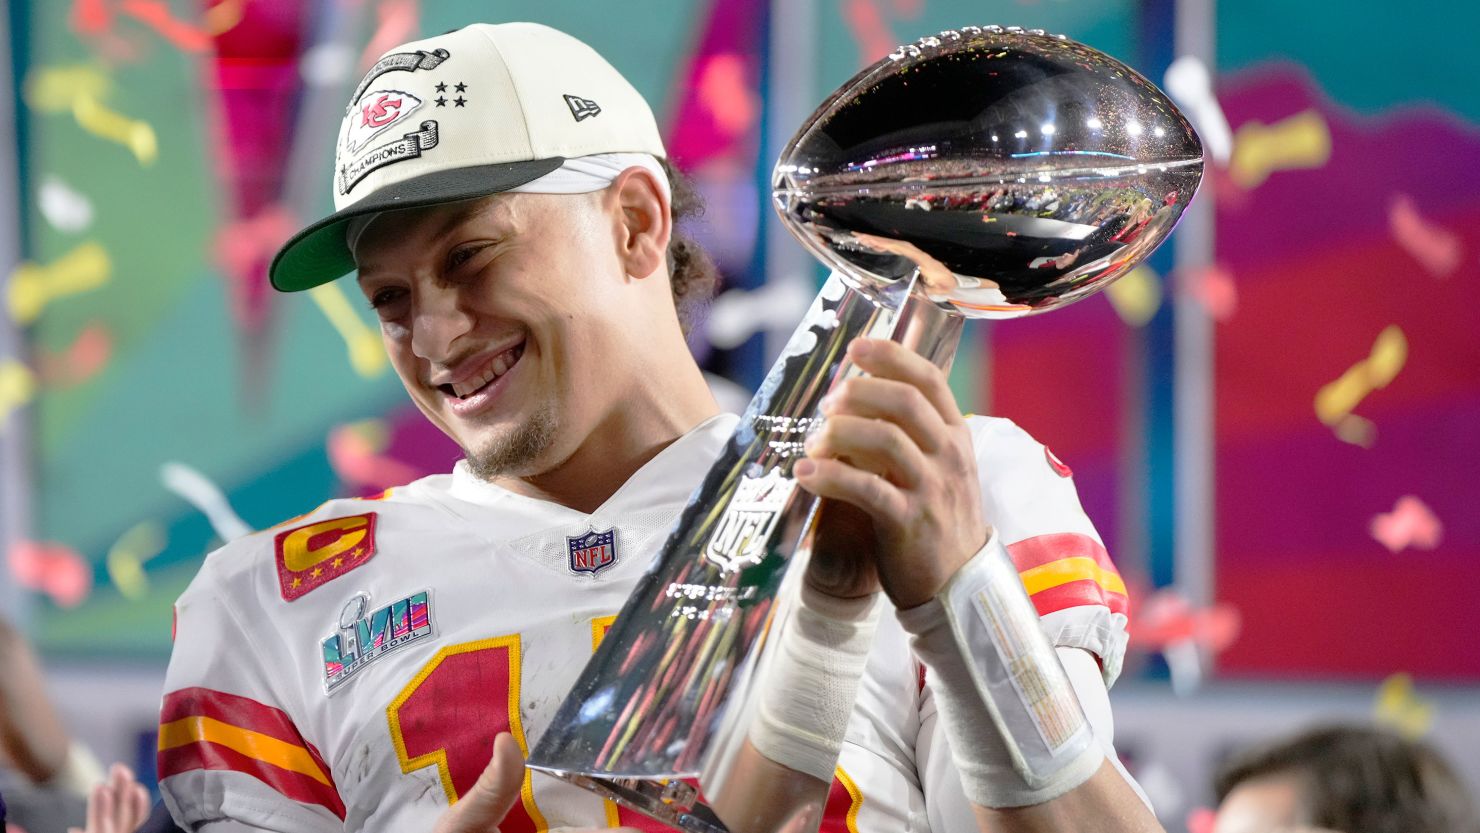 Is Patrick Mahomes on track to become one of the greatest quarterbacks of all time?